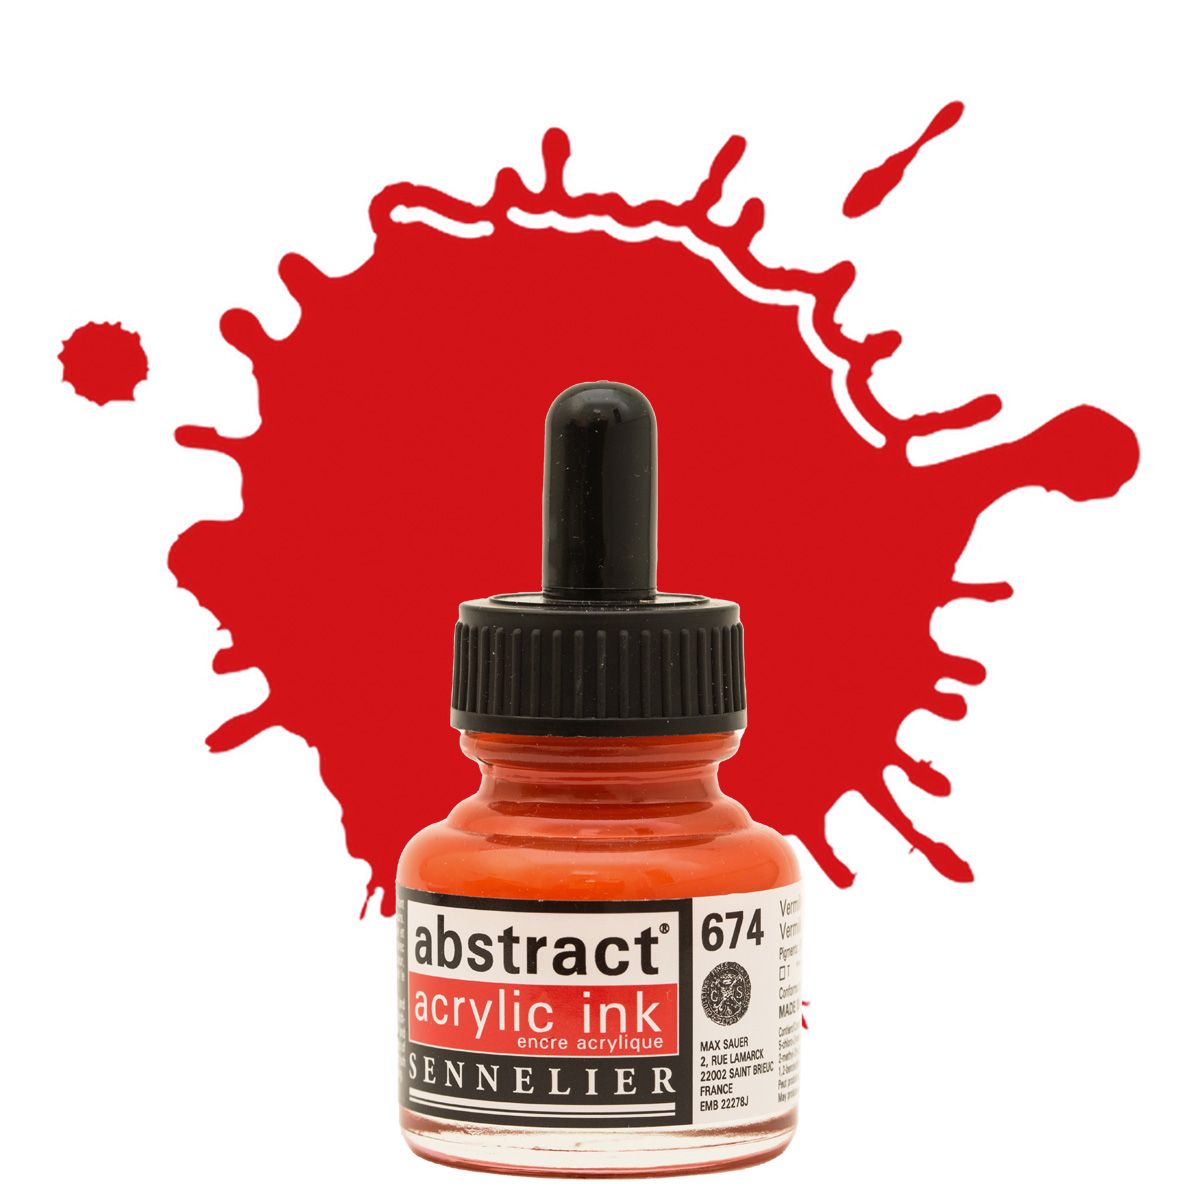 Sennelier Abstract Acrylic Ink - Vermilion, 30ml